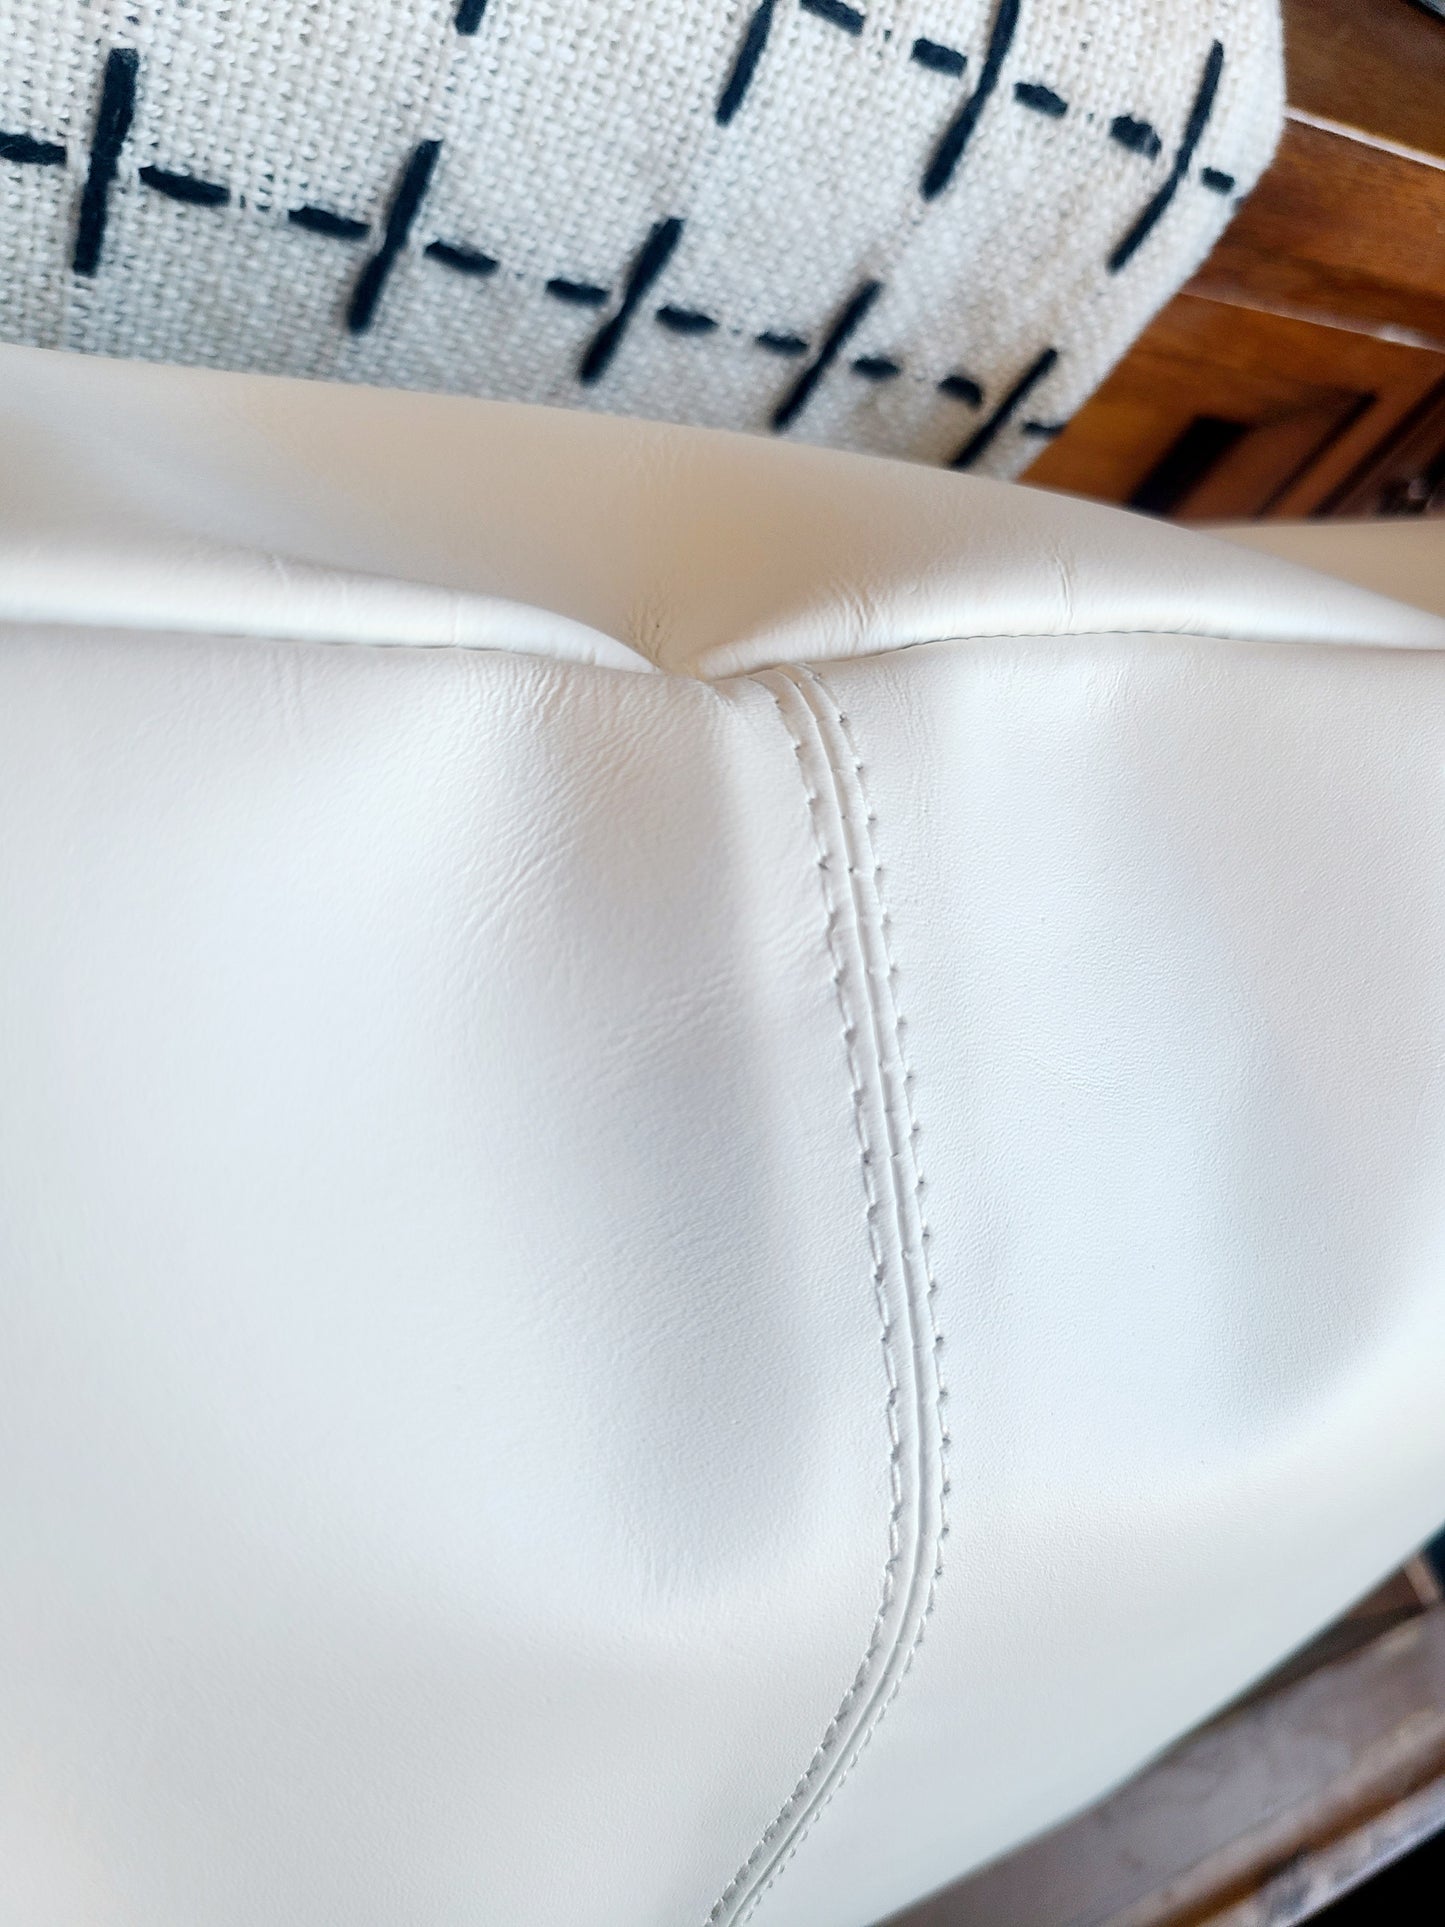 100% Leather Classic White Throw Pillow Cover - 18 x 18-Status Co. Leather Studio